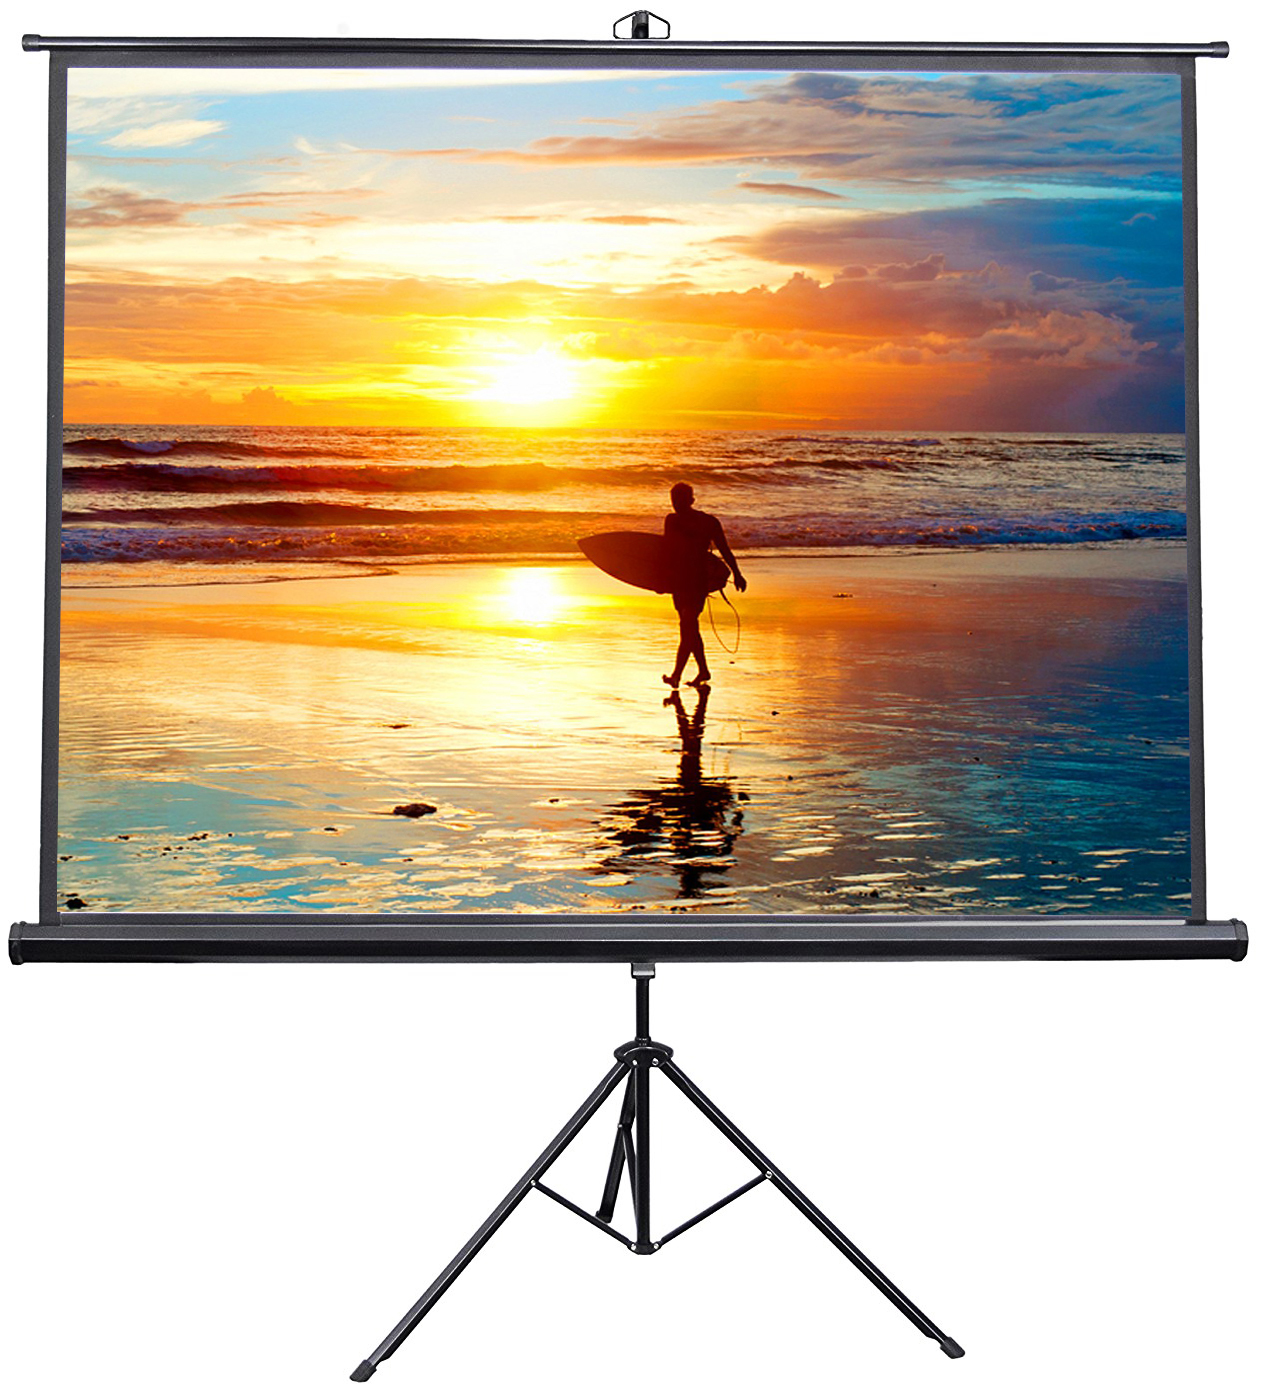 VIVO 100" Portable Projector Screen 4:3 Projection Pull Up Foldable Stand Tripod - image 1 of 6